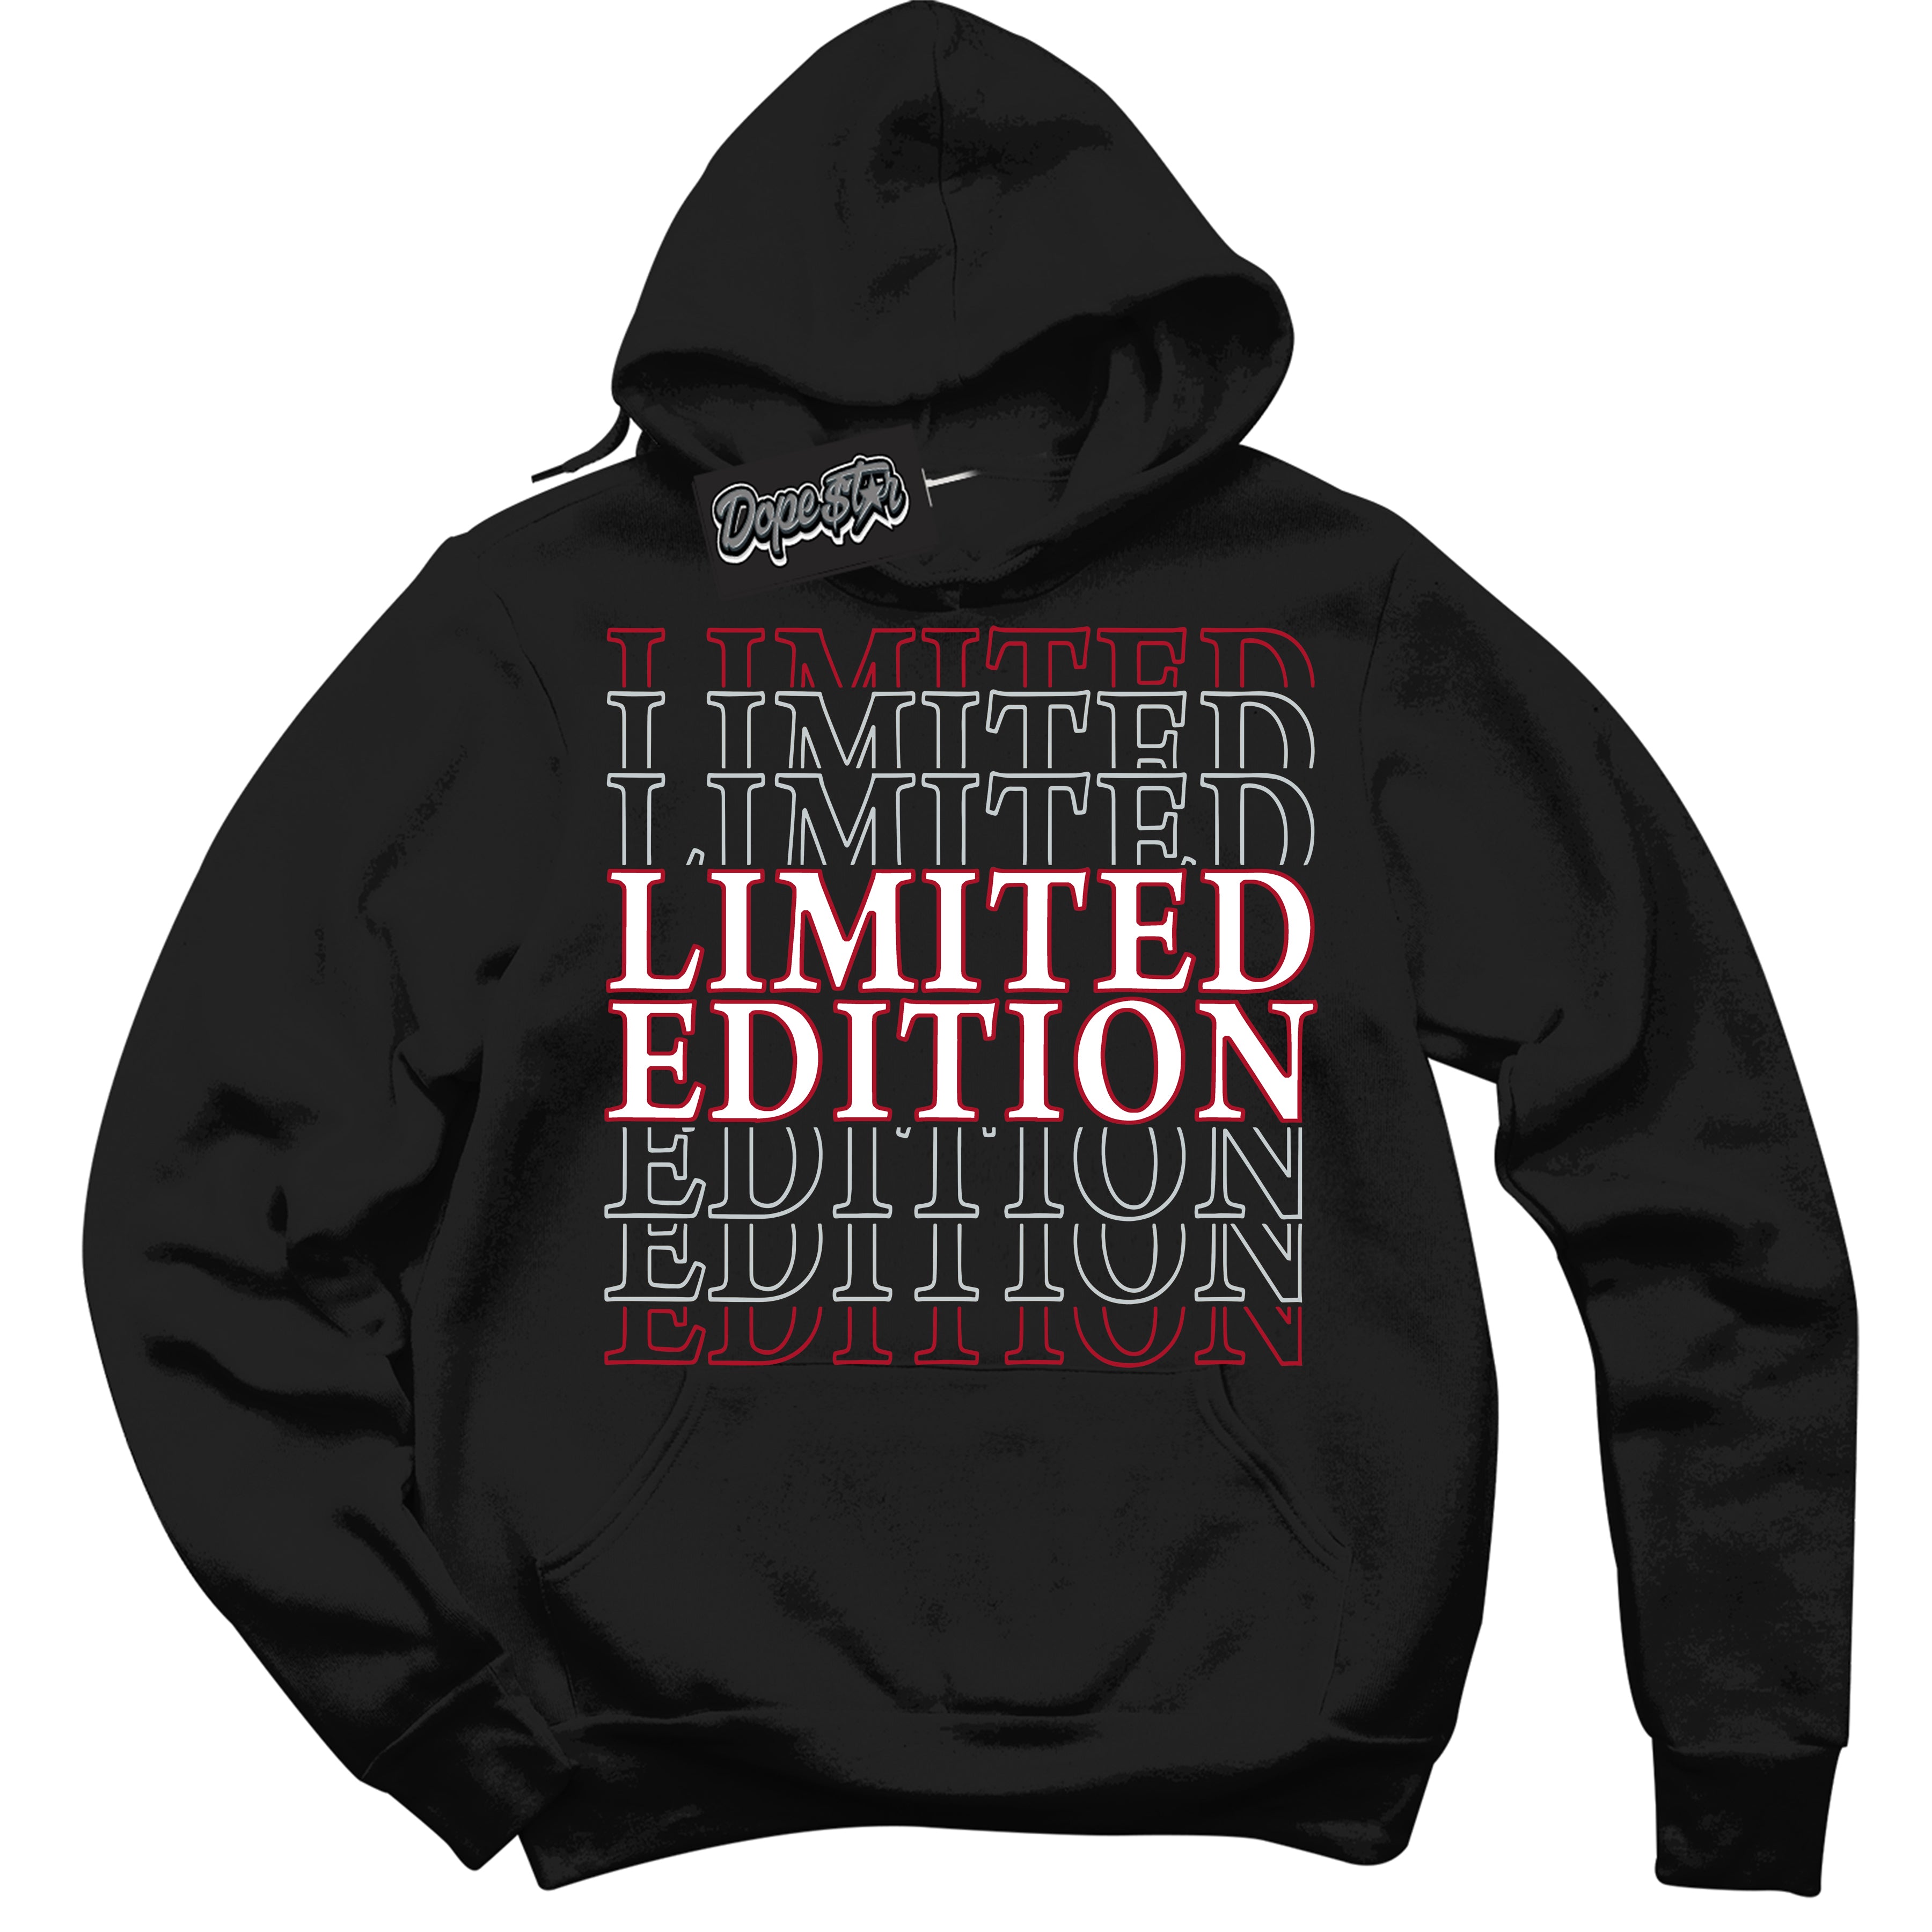 Cool Black Hoodie with “ Limited Edition ”  design that Perfectly Matches  Reverse Ultraman Sneakers.